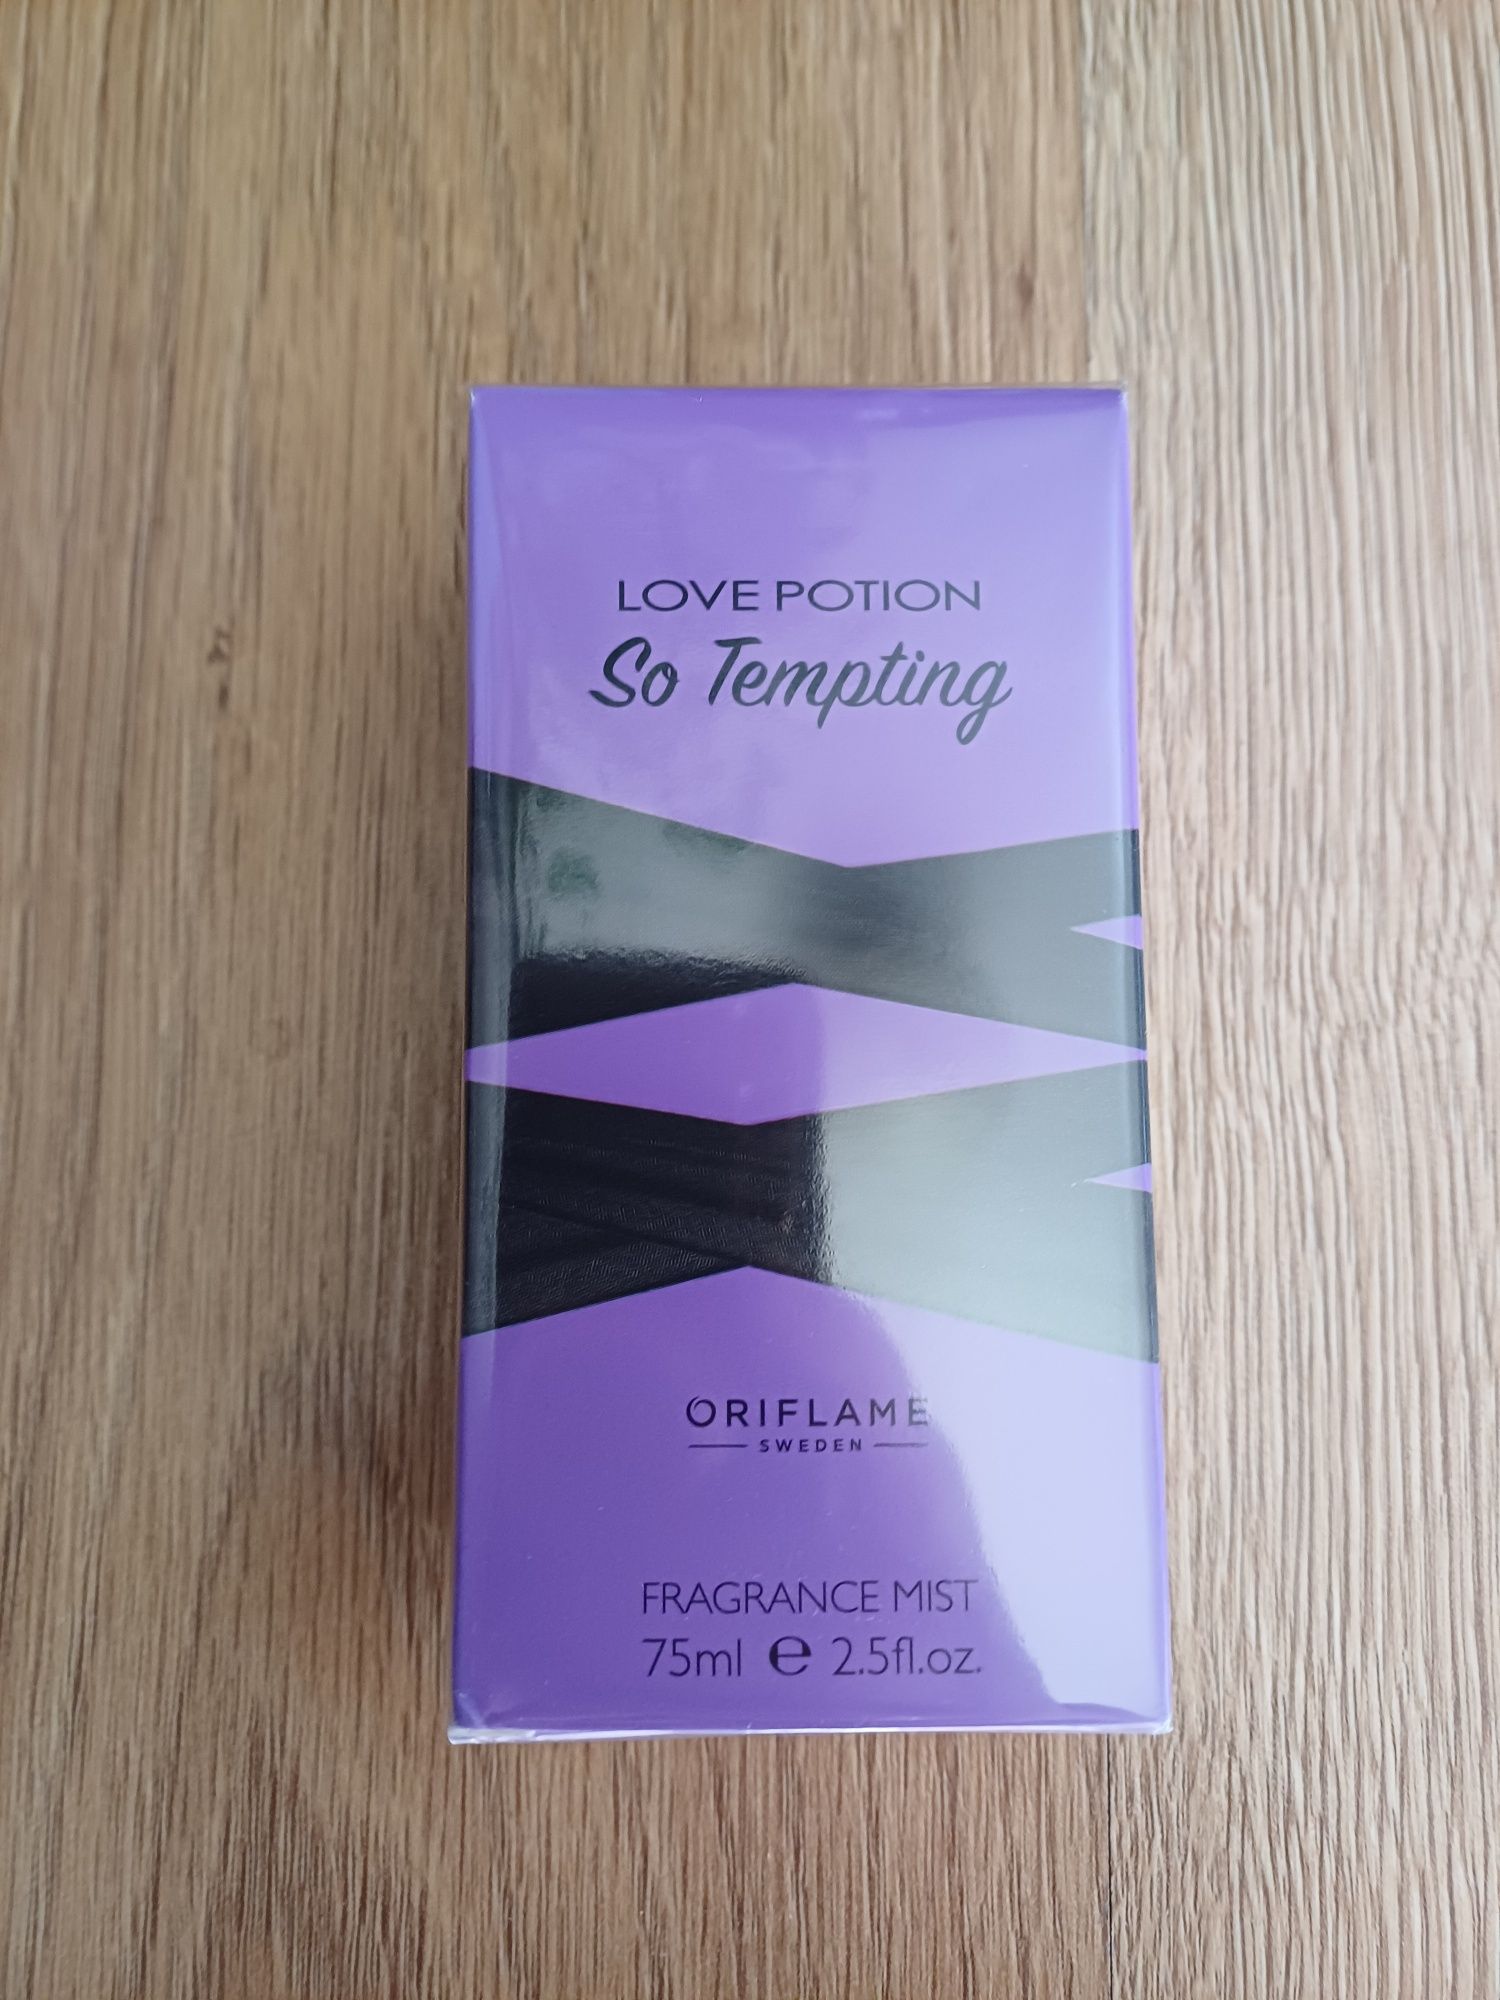 Love Potion So Tempting 75ml Oriflame